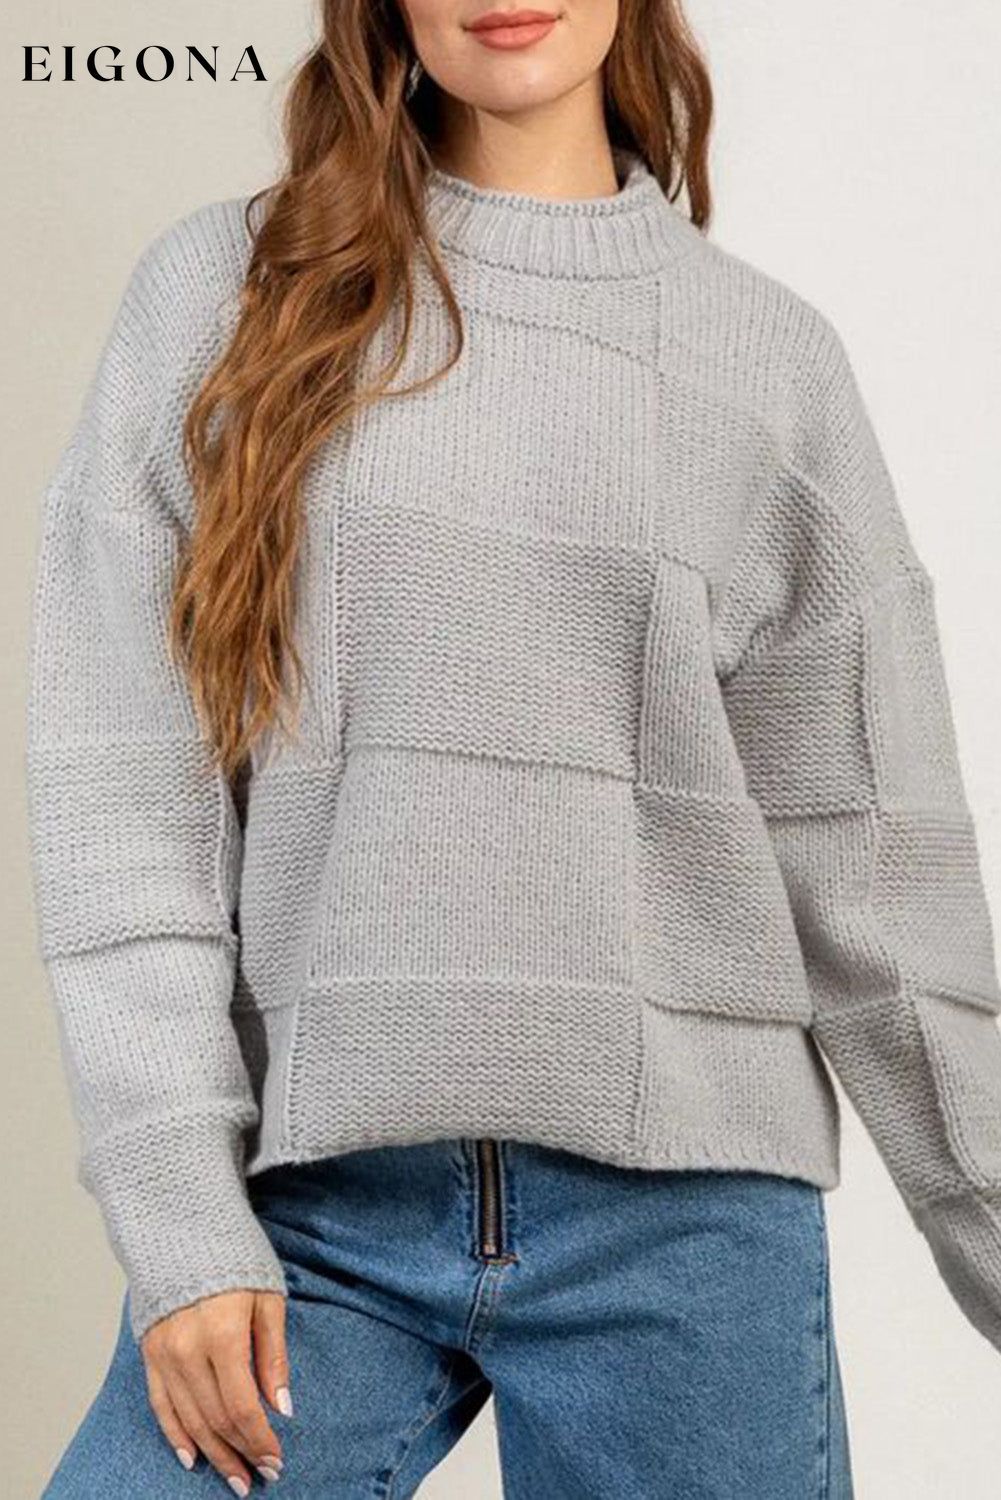 Gray Mock Neck Checkered Textured Sweater Gray 100%Acrylic clothes Sweater sweaters Sweatshirt